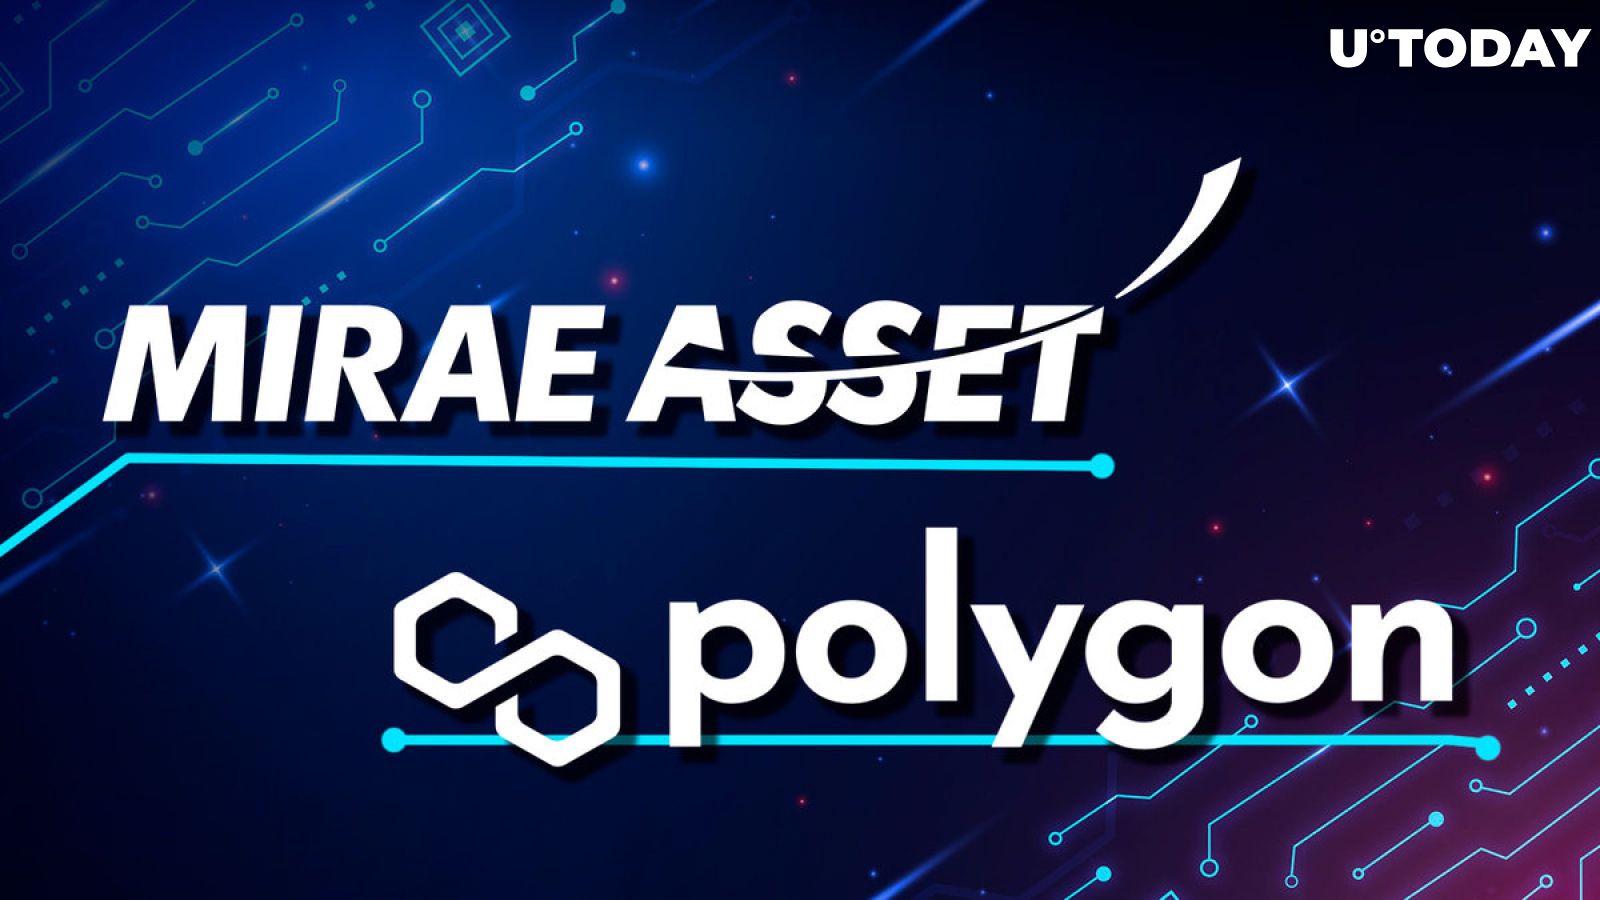 Polygon Teams up With Mirae Asset Securities, Korea's Largest Financial Group